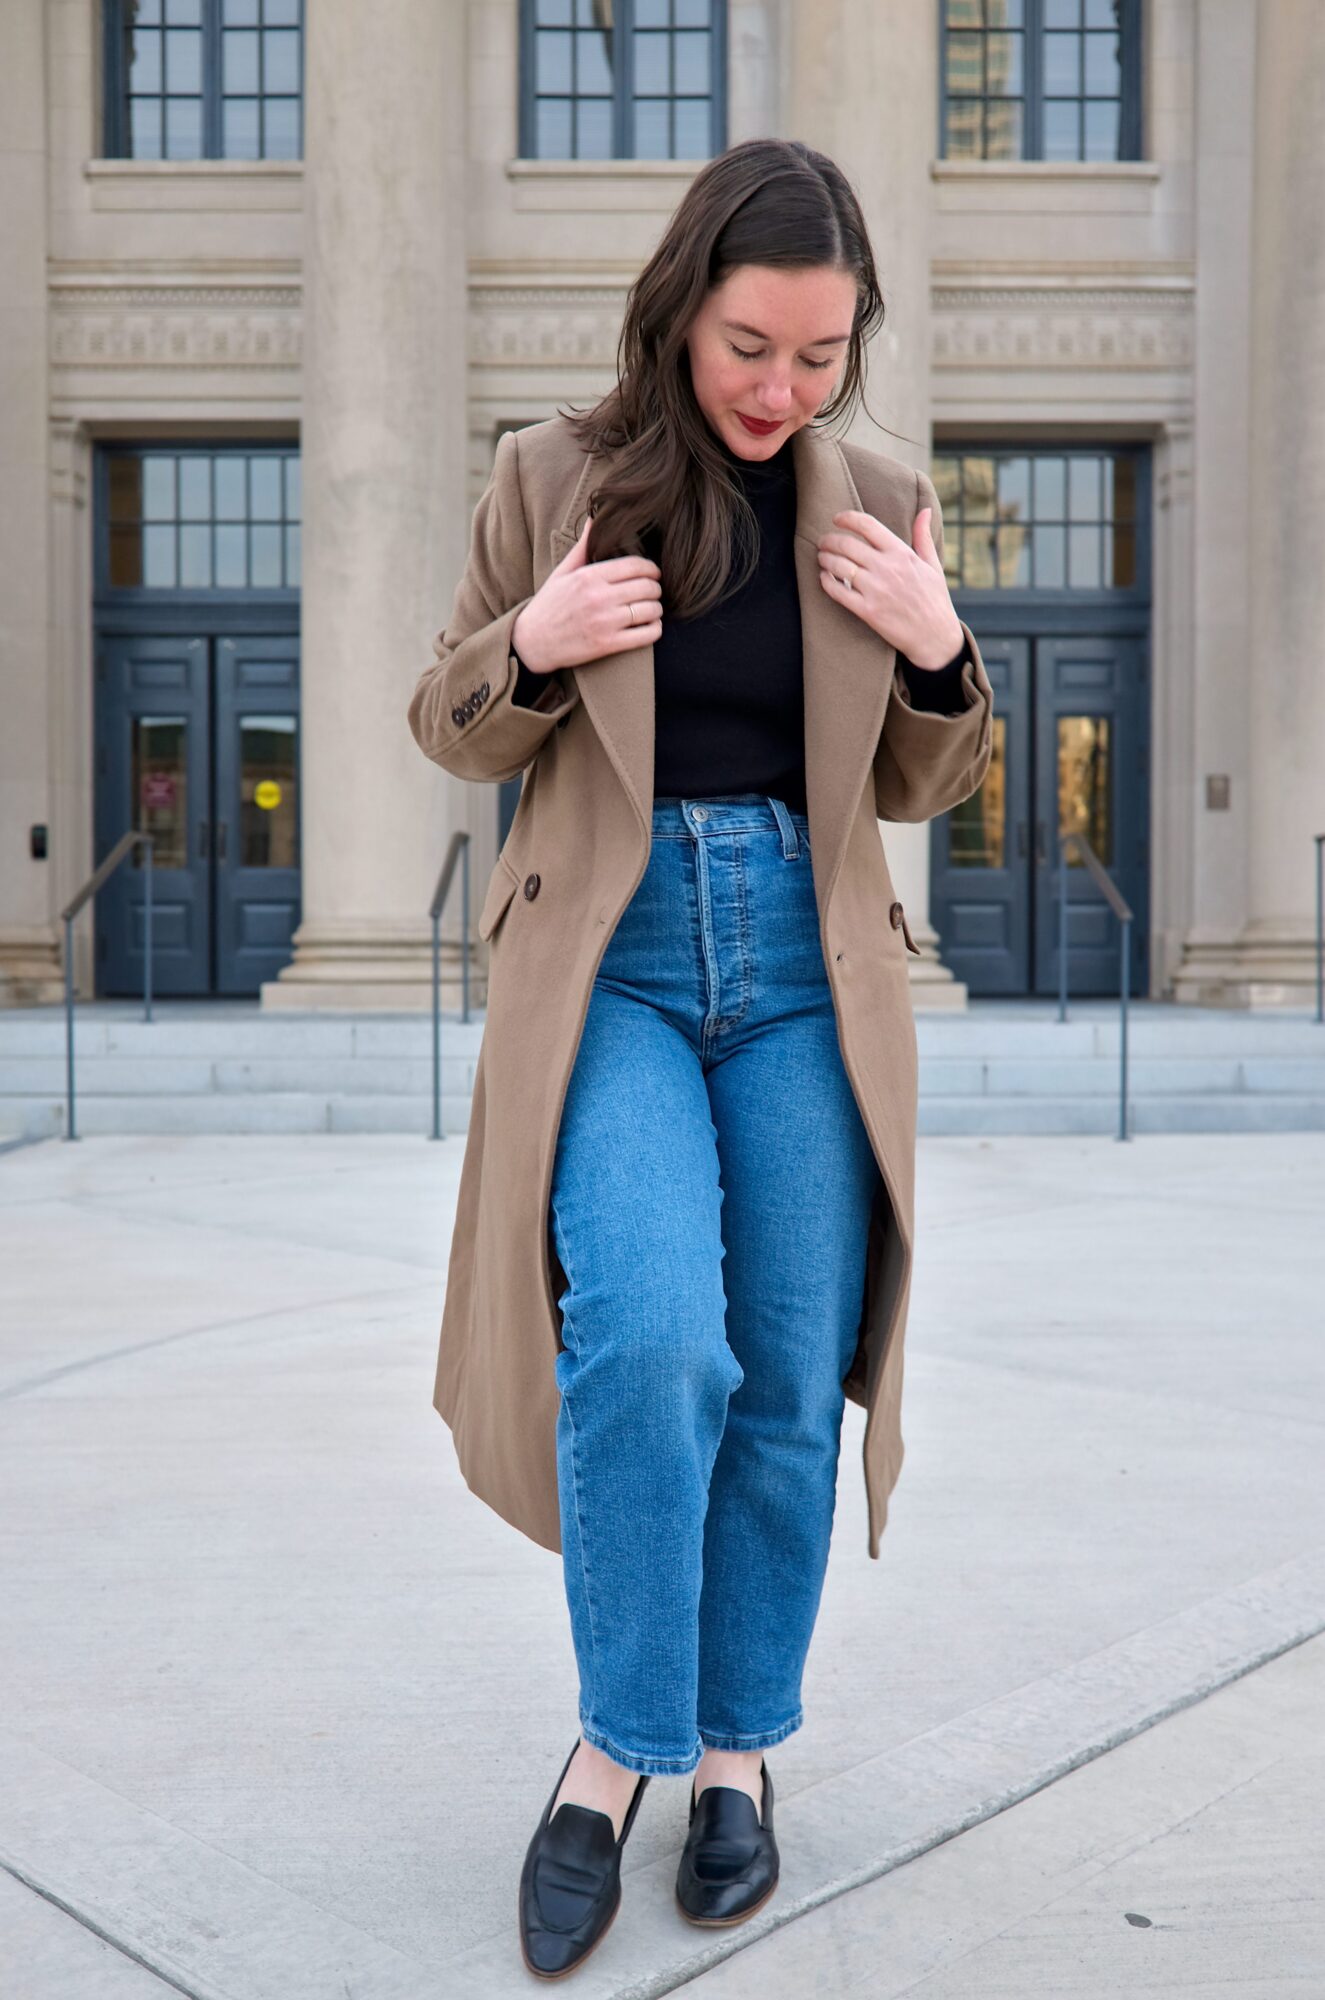 Alyssa wears the Italian Wool Double-Breasted Coat with jeans and a black top and pulls the lapels in closer